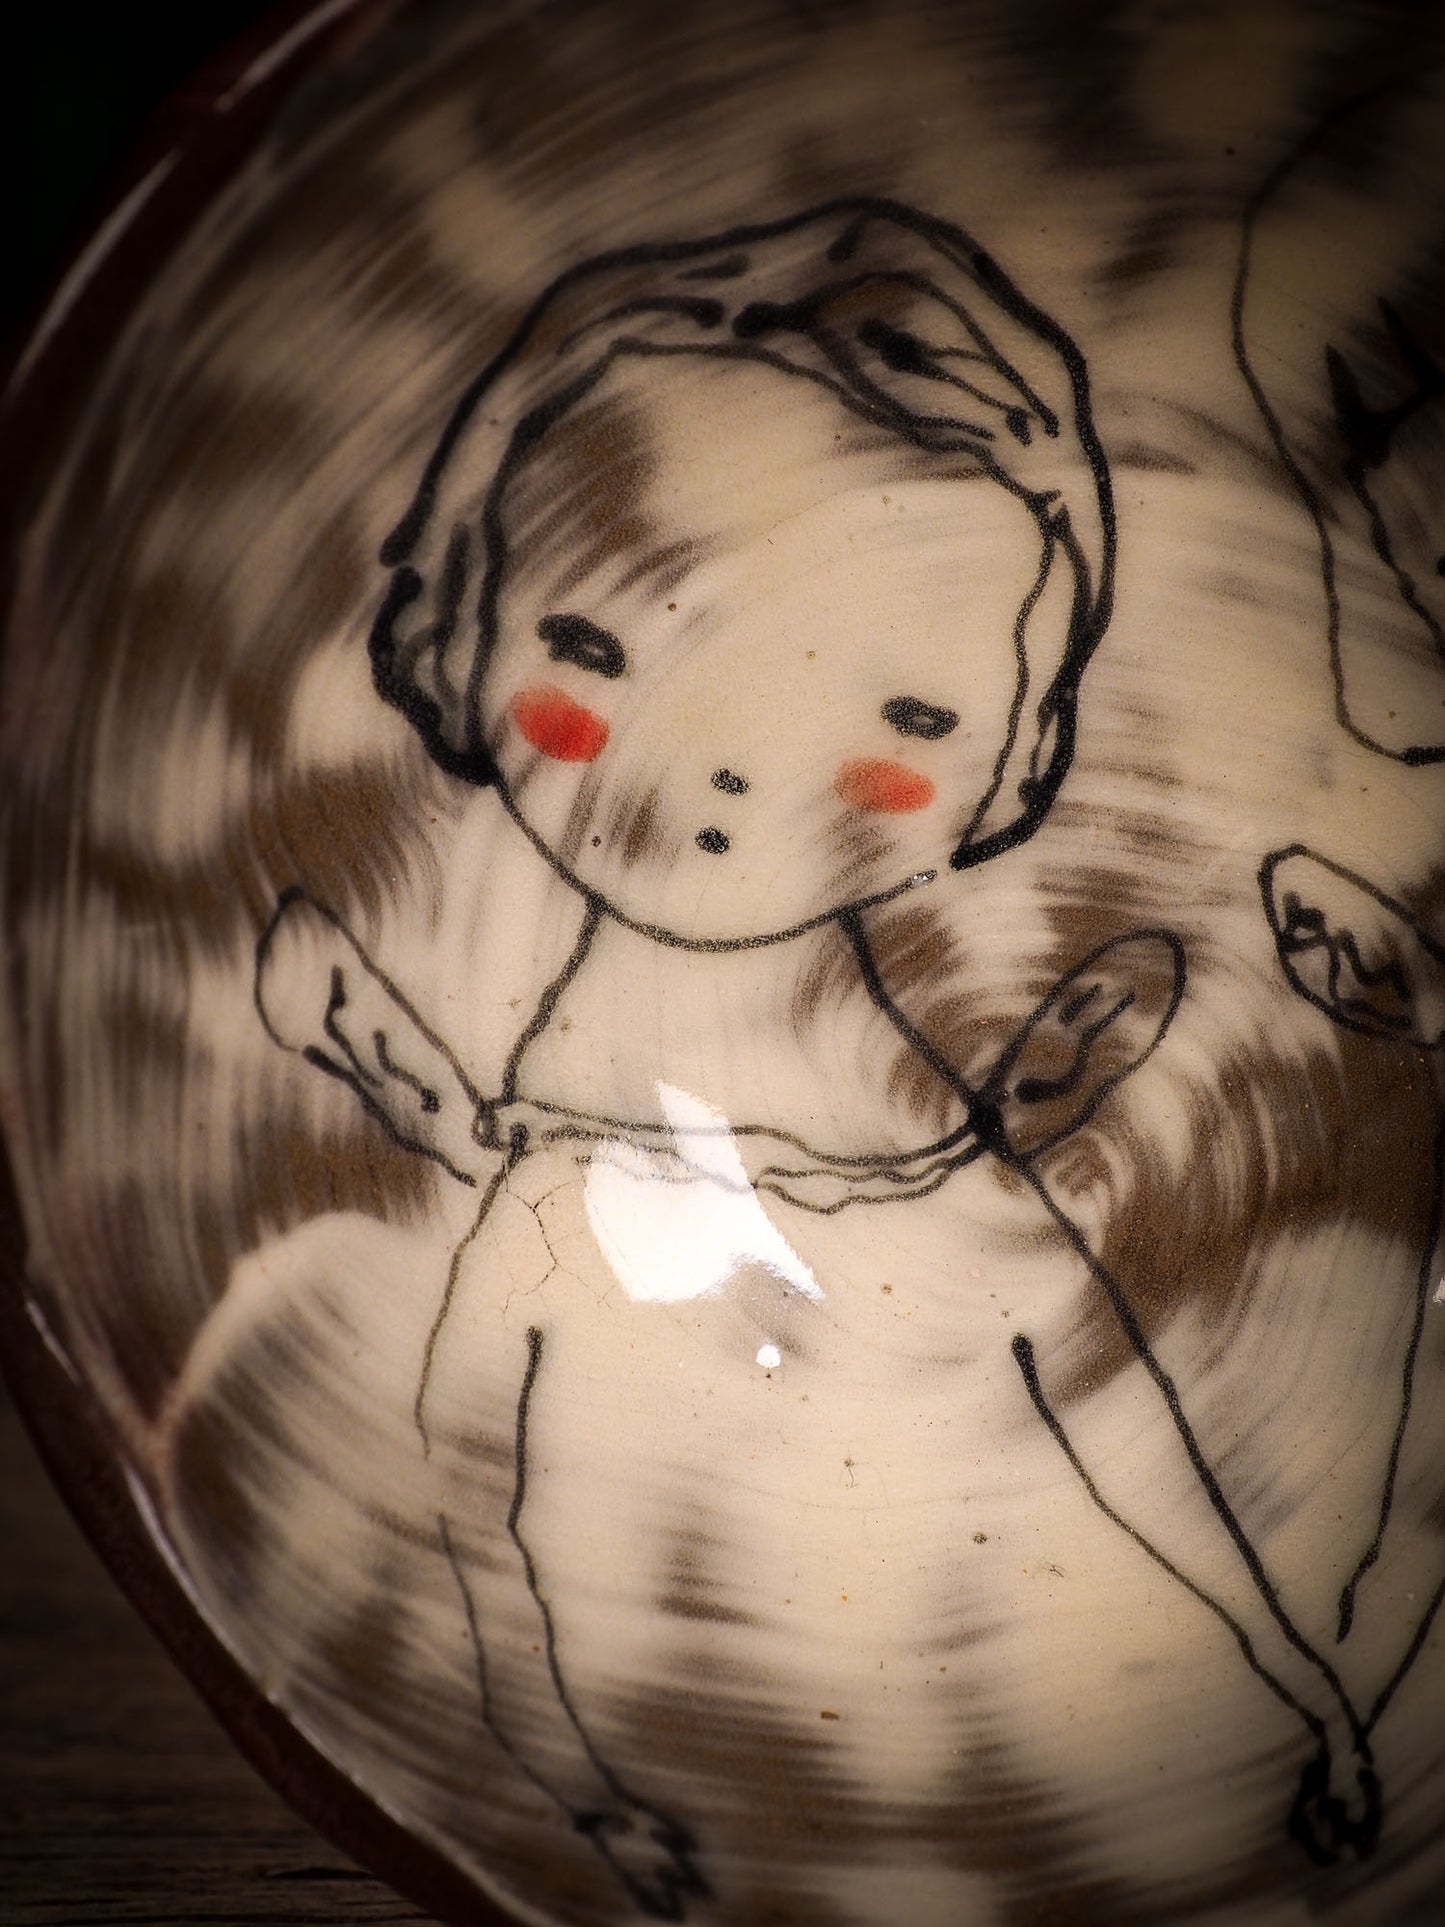 An original glazed ceramic food bowl by Idania Salcido, the artist behind Danita Art. Totally handmade in my studio, this is a unique piece that cannot be repeated. Food and drink safe, hand wash only. Brown earth tones and an ink drawing of two angel girls on the outside.